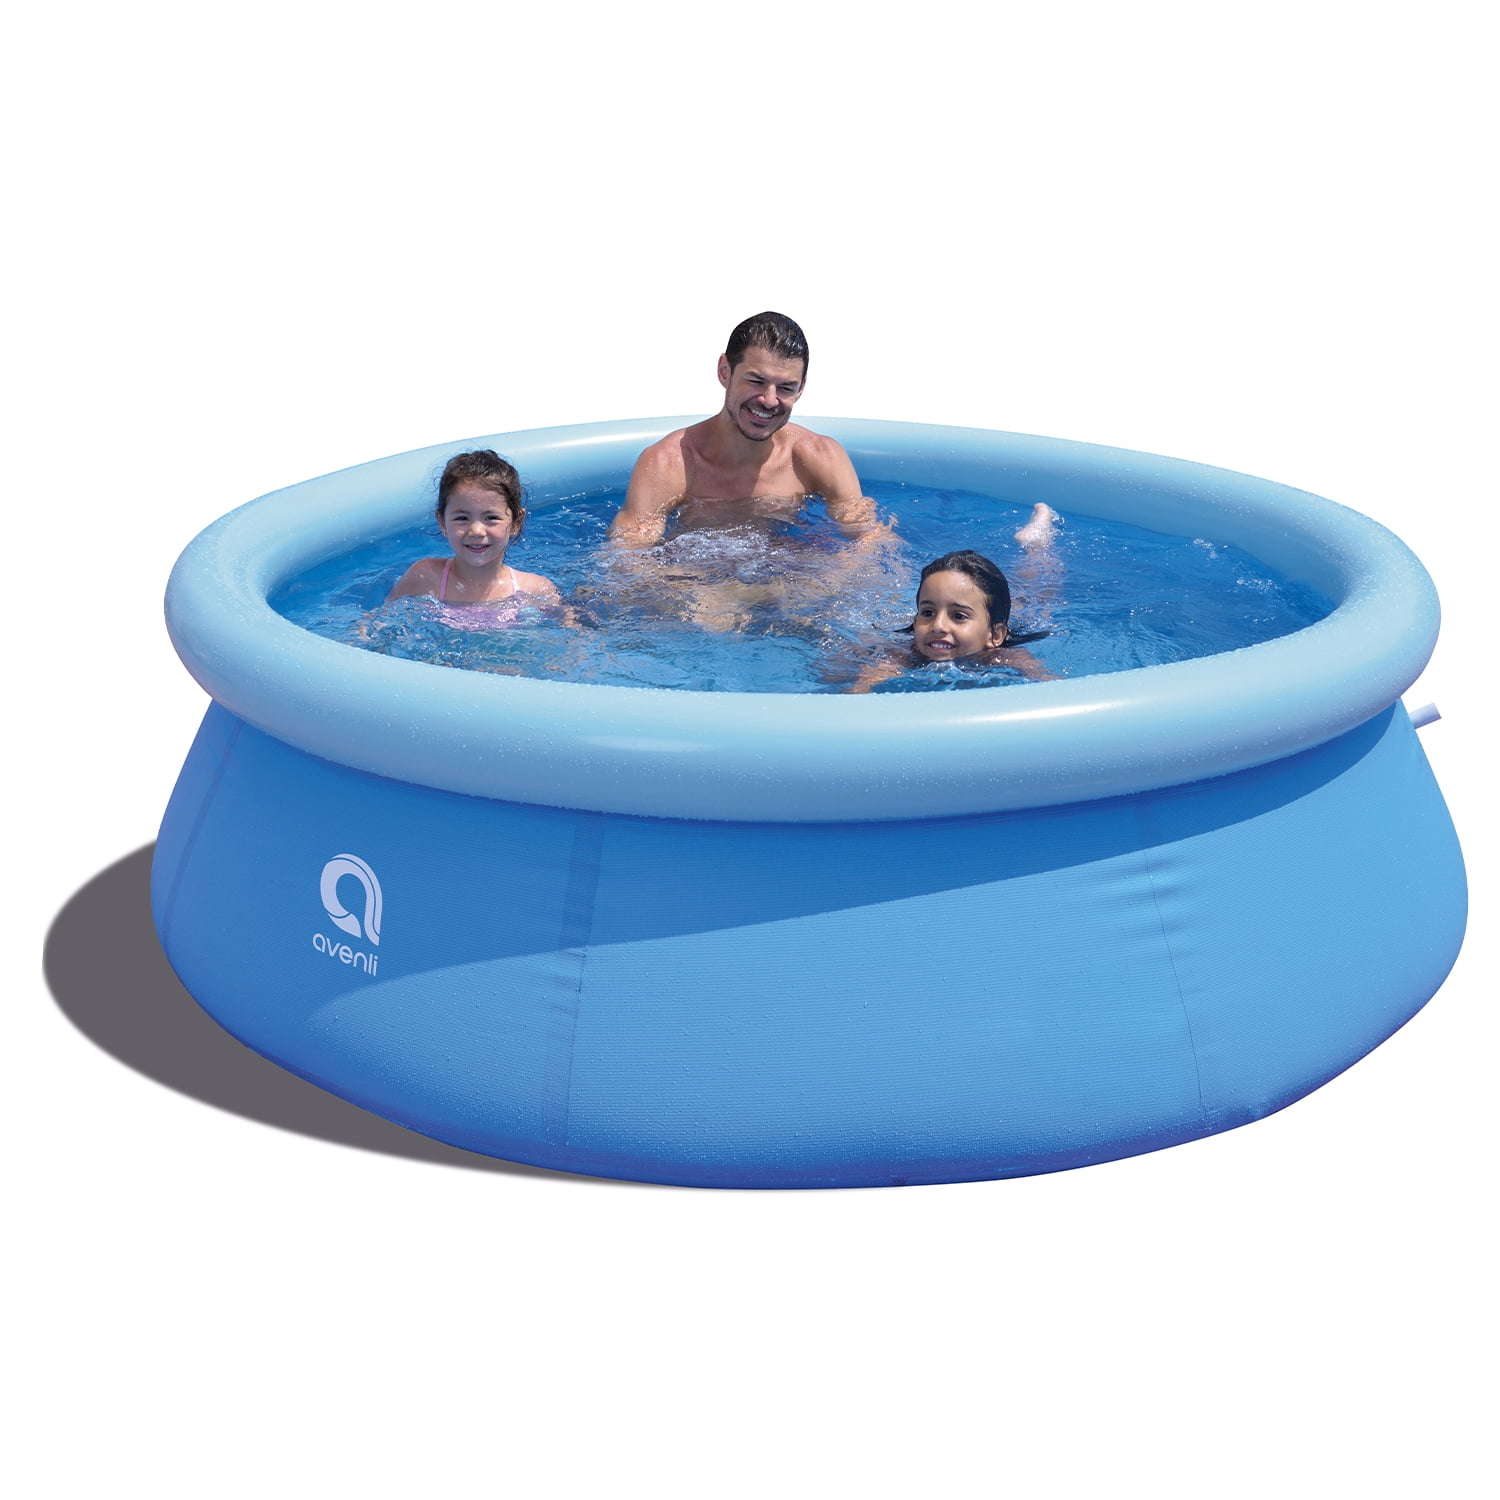 JLeisure Avenli 17807 10 Foot x 30 Inch 2 to 3 Person Capacity Prompt Set Above Ground Kid Inflatable Outdoor Backyard Swimming Pool Blue 